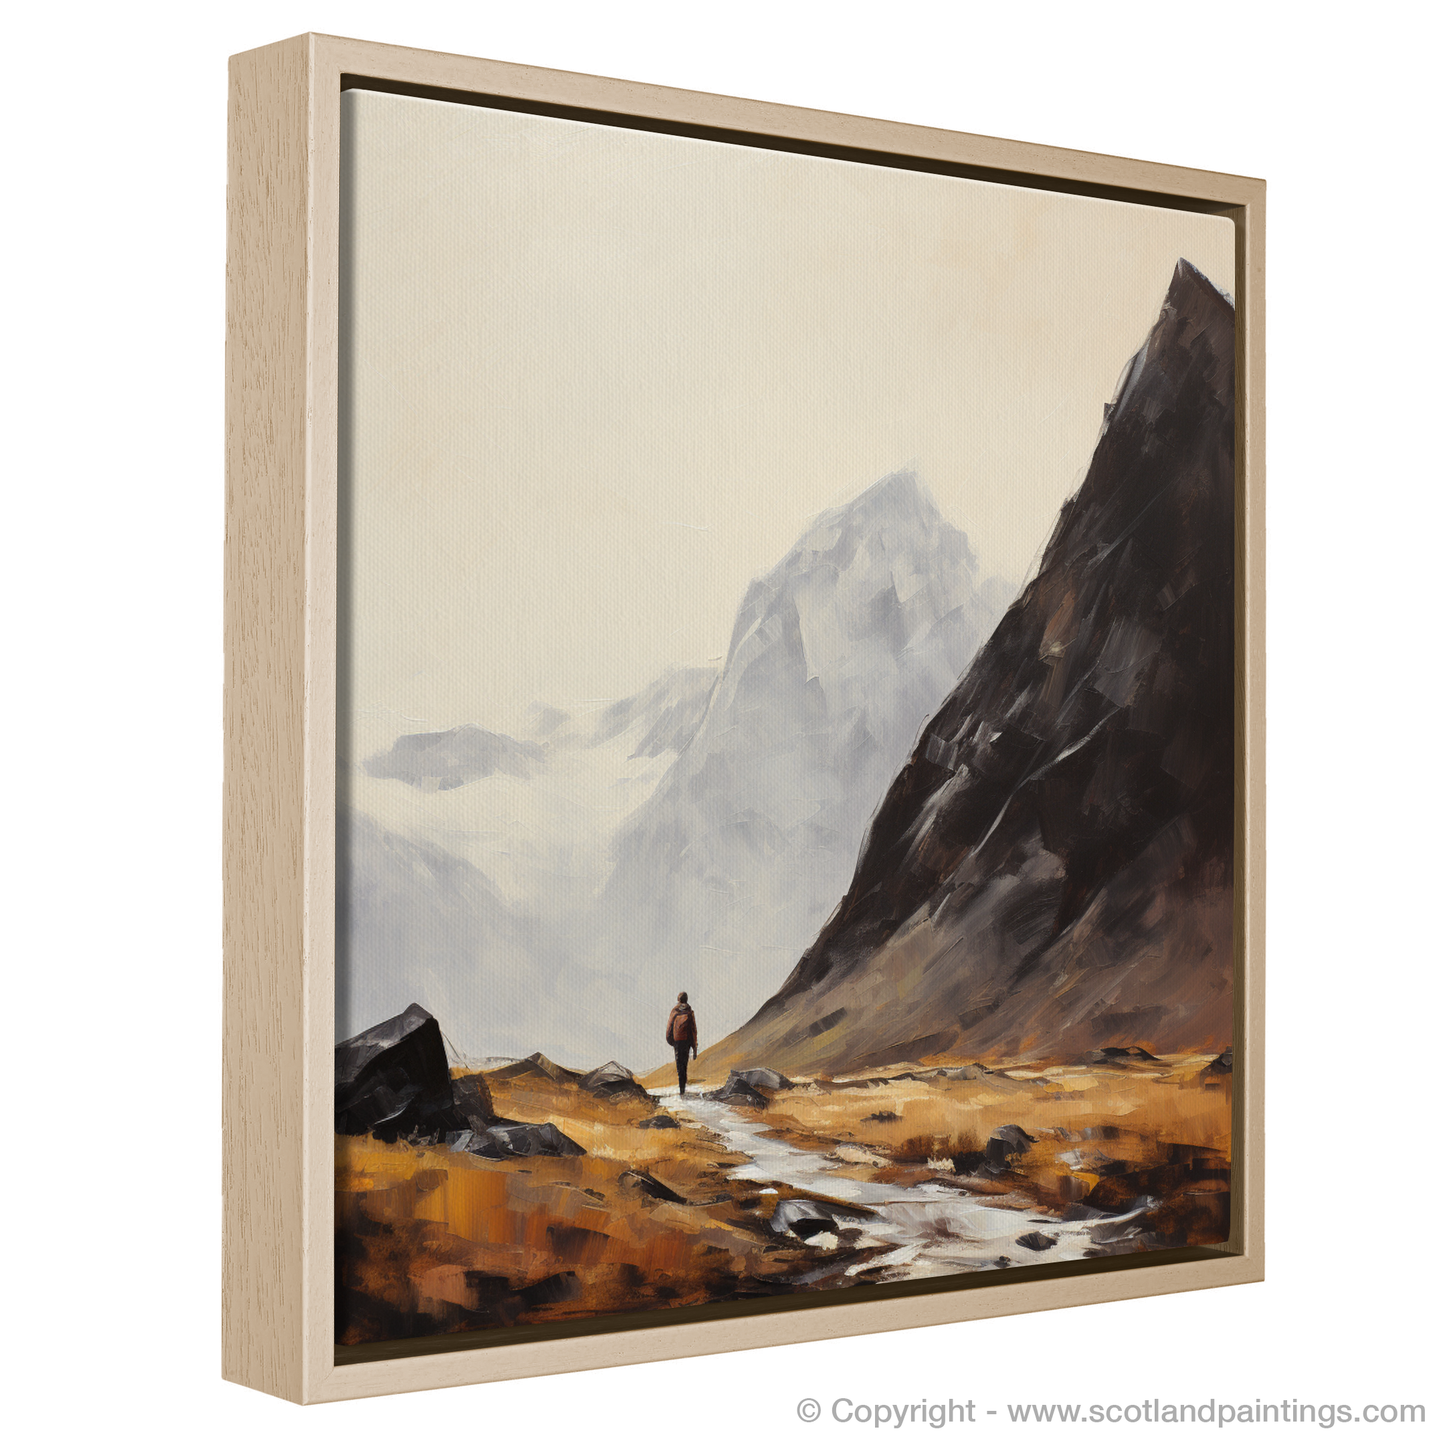 Painting and Art Print of A lone hiker in Glencoe entitled "Solitary Hiker: An Expressionist Ode to Glencoe's Wild Beauty".